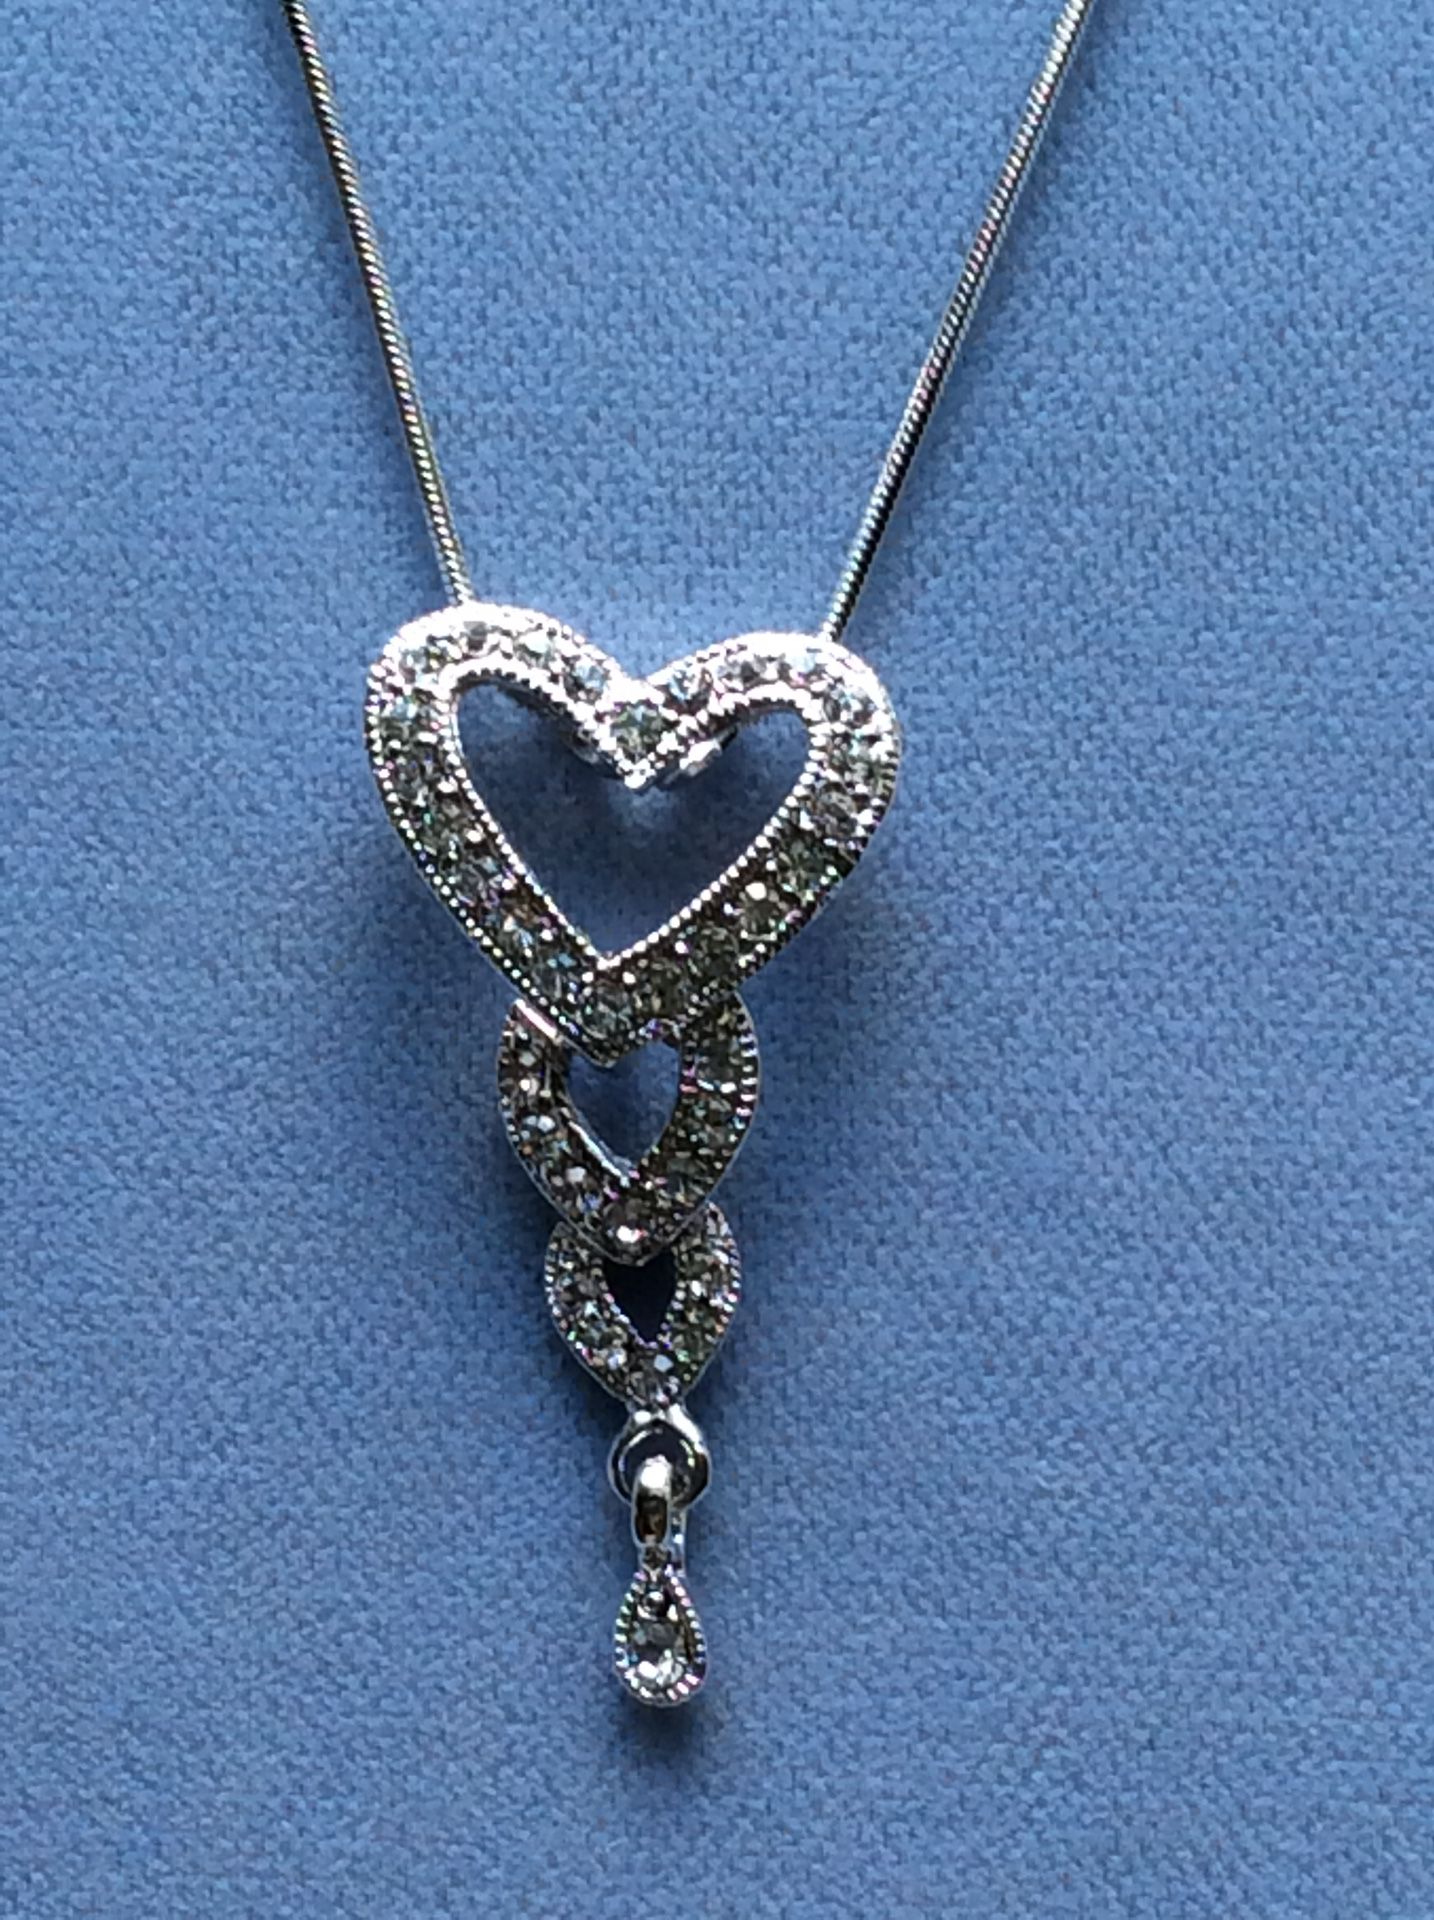 Sparkling Triple Crystal Heart Necklace On Snake Chain *Ship Nationwide Or Pickup Boca Raton